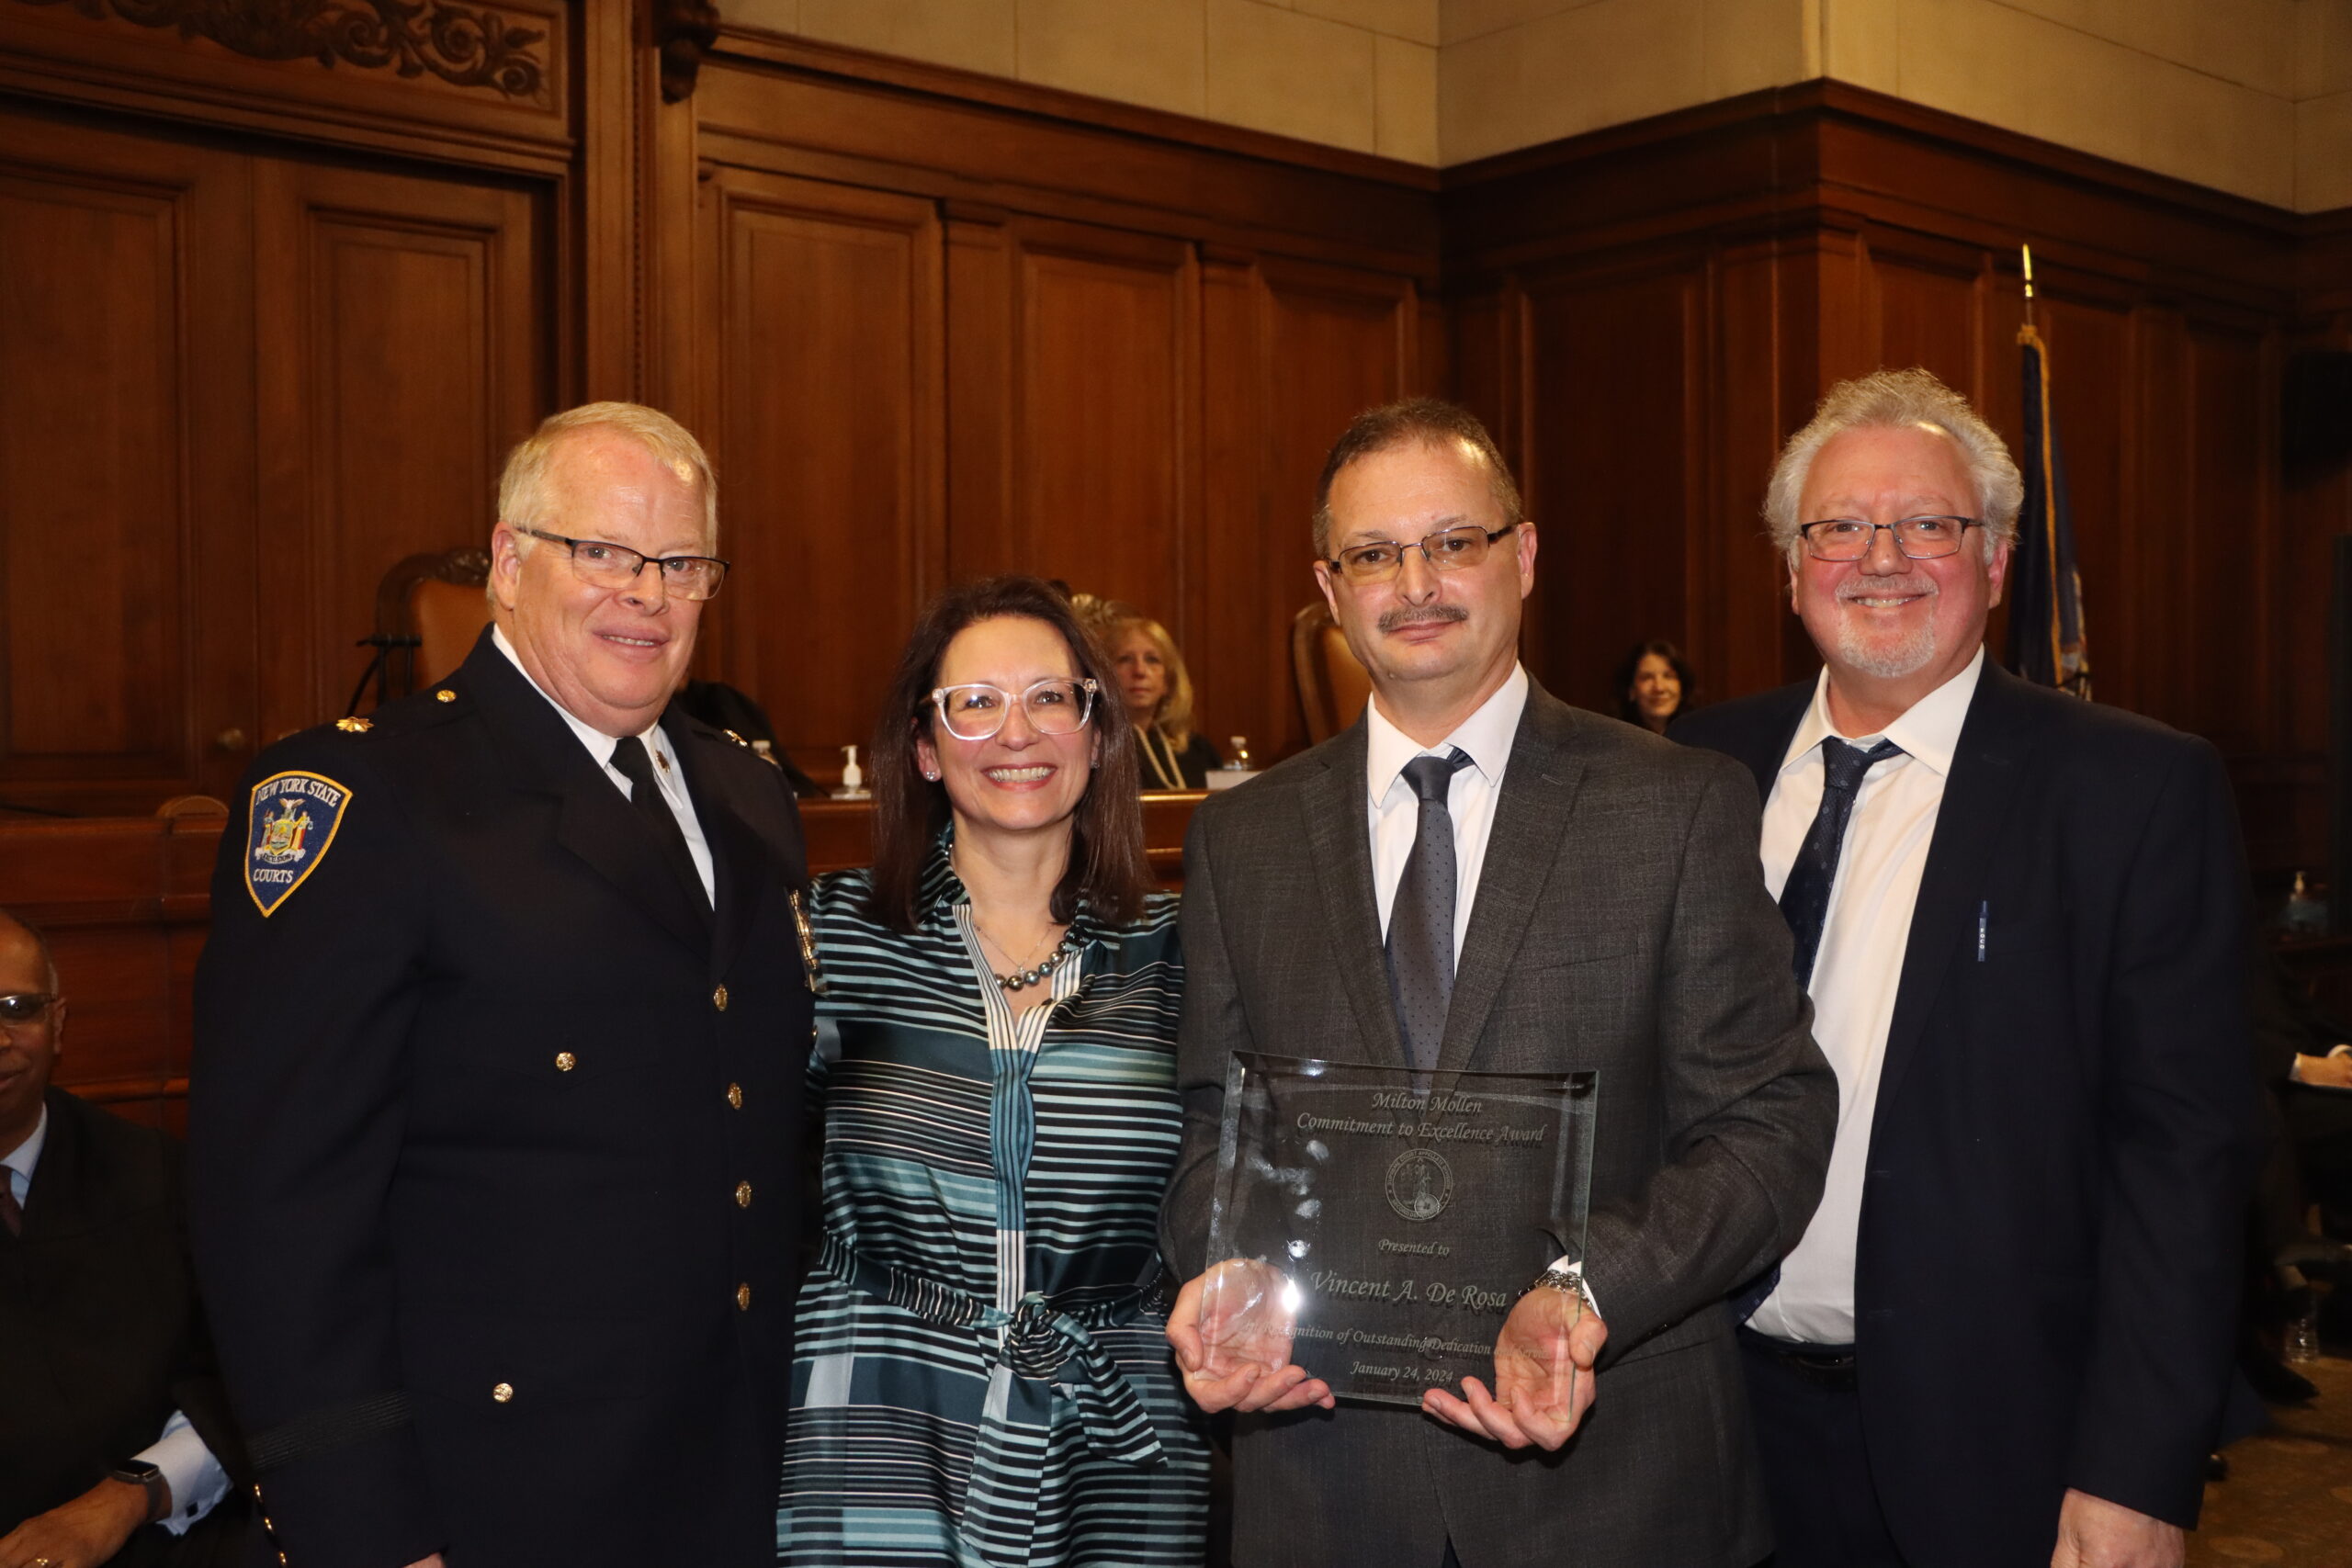 Vincent DeRosa (second from right), court clerk specialist from the Queens Supreme Court, Criminal Term was presented with the Mollen Award at Milton Mollen Commitment.